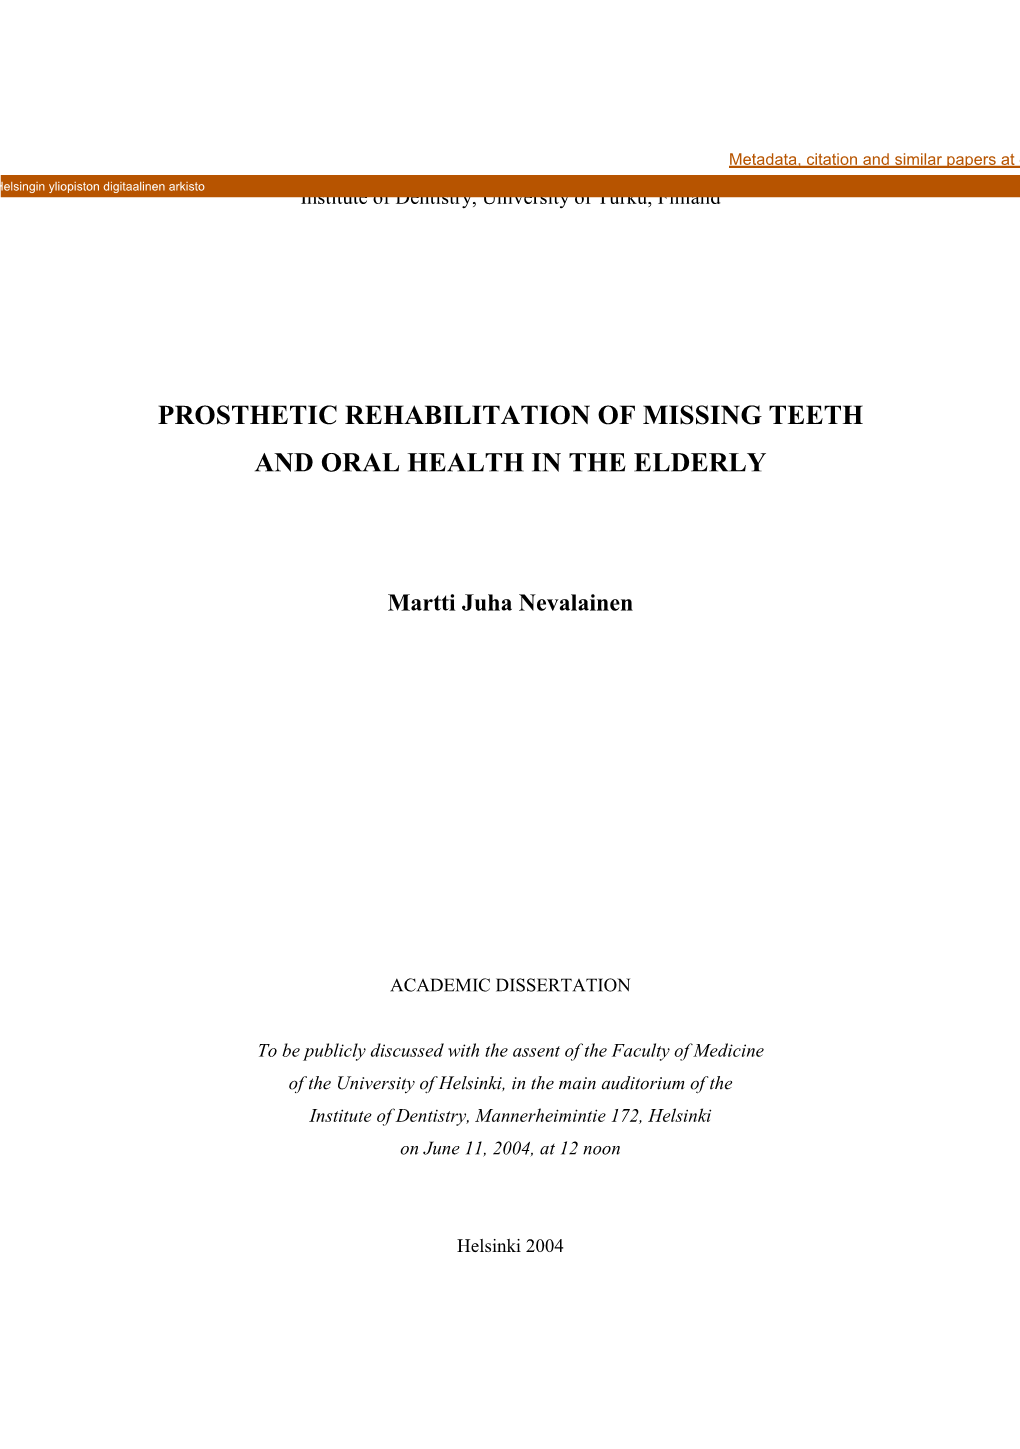 Prosthetic Rehabilitation of Missing Teeth and Oral Health in the Elderly